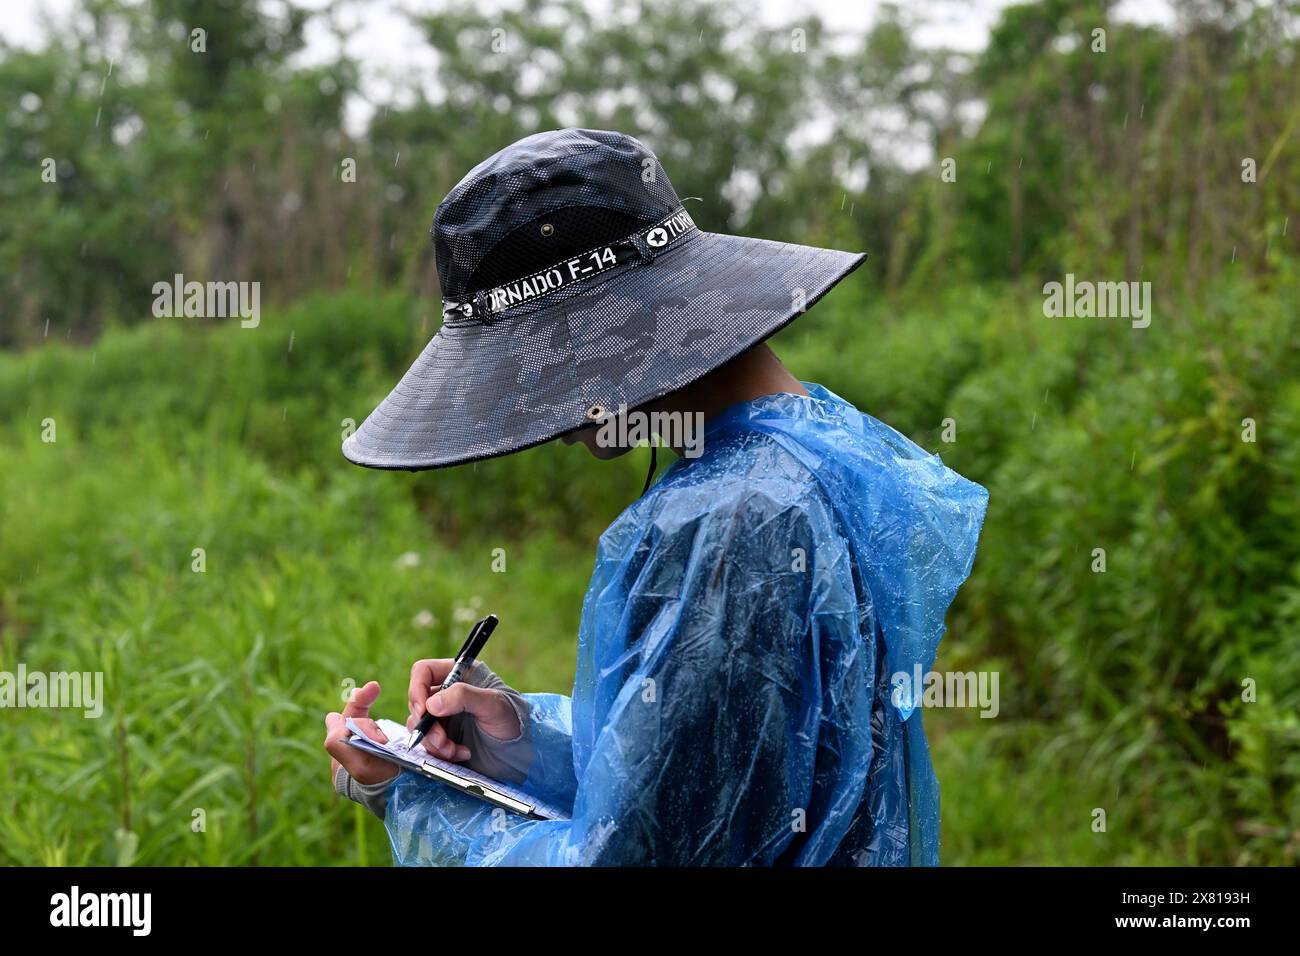 (240522) -- NANLING, May 22, 2024 (Xinhua) -- A surveyor keeps a record during a survey at Changle area in Anhui Yangtze alligator national nature reserve, Nanling county of Wuhu City, east China's Anhui Province, May 21, 2024. The Yangtze alligator, a species that has existed on Earth for over 200 million years, now a first-class protected animal endemic to China, also known as Chinese alligator, lives along the middle and lower reaches of the Yangtze River, the longest waterway in the country. A wild population resources survey of Yangtze alligators was officially launched on Monday, which Stock Photo